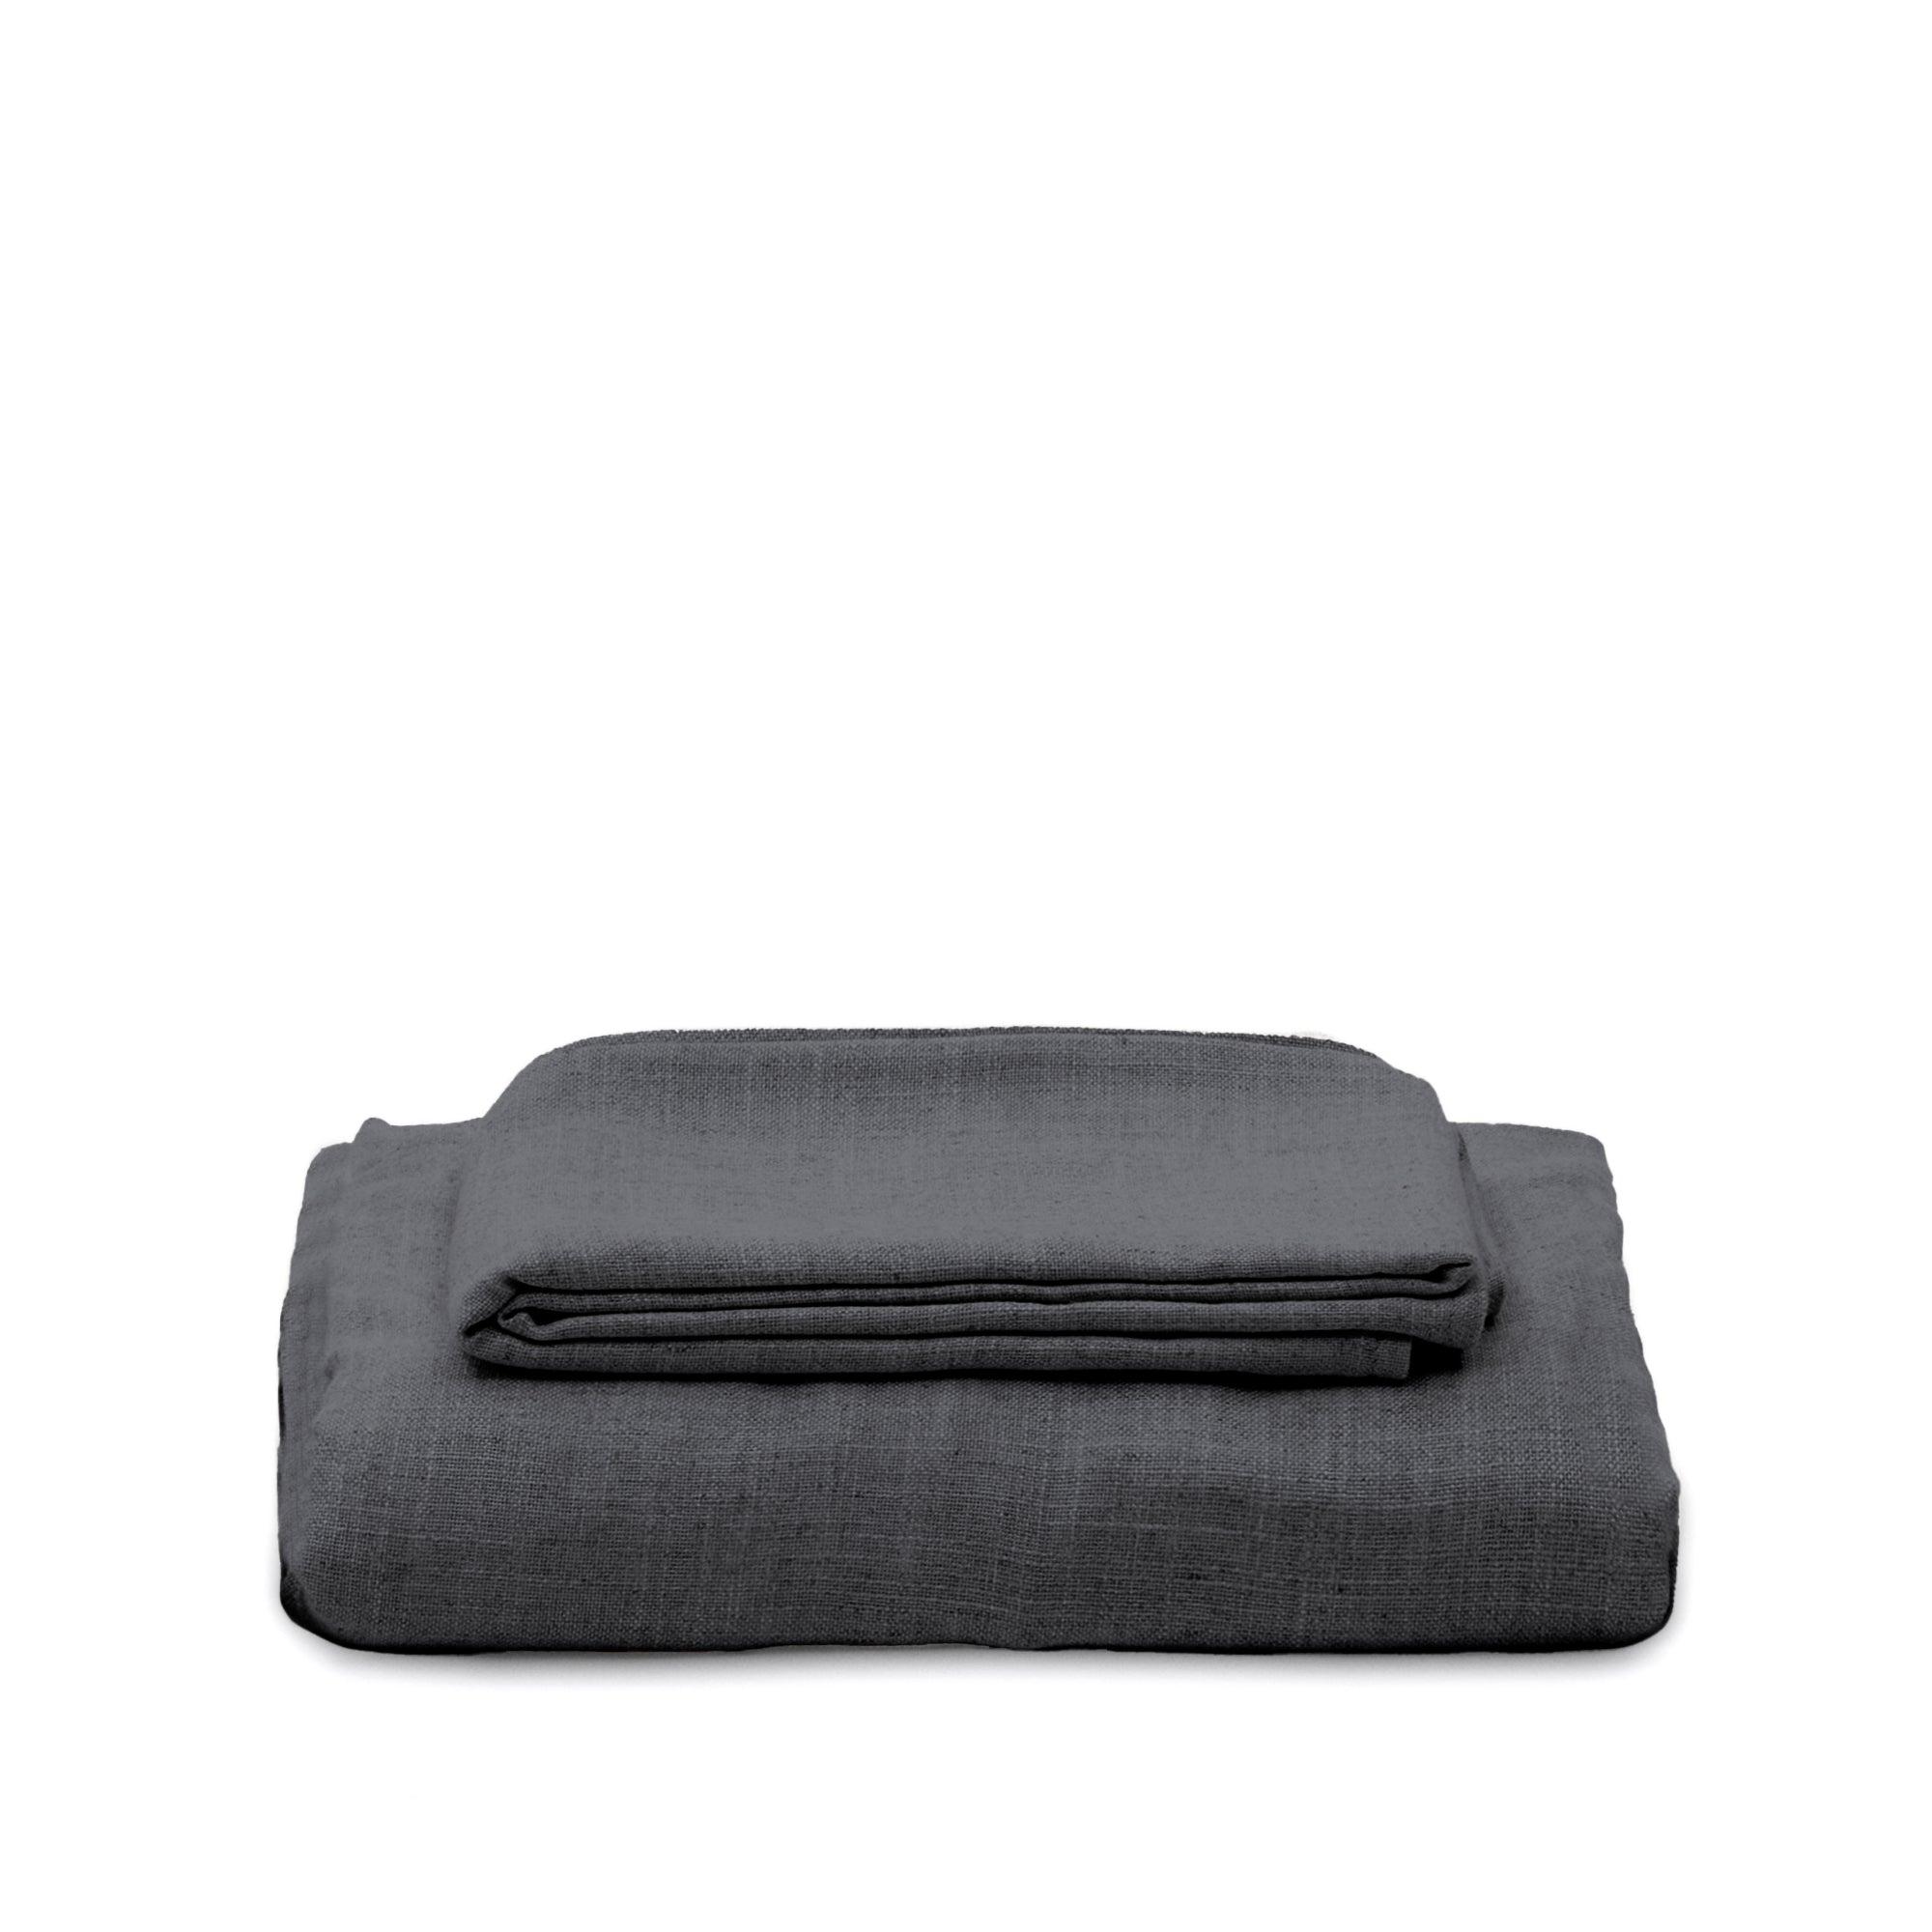 Nora 3-seat sofa cover in anthracite gray linen and cotton